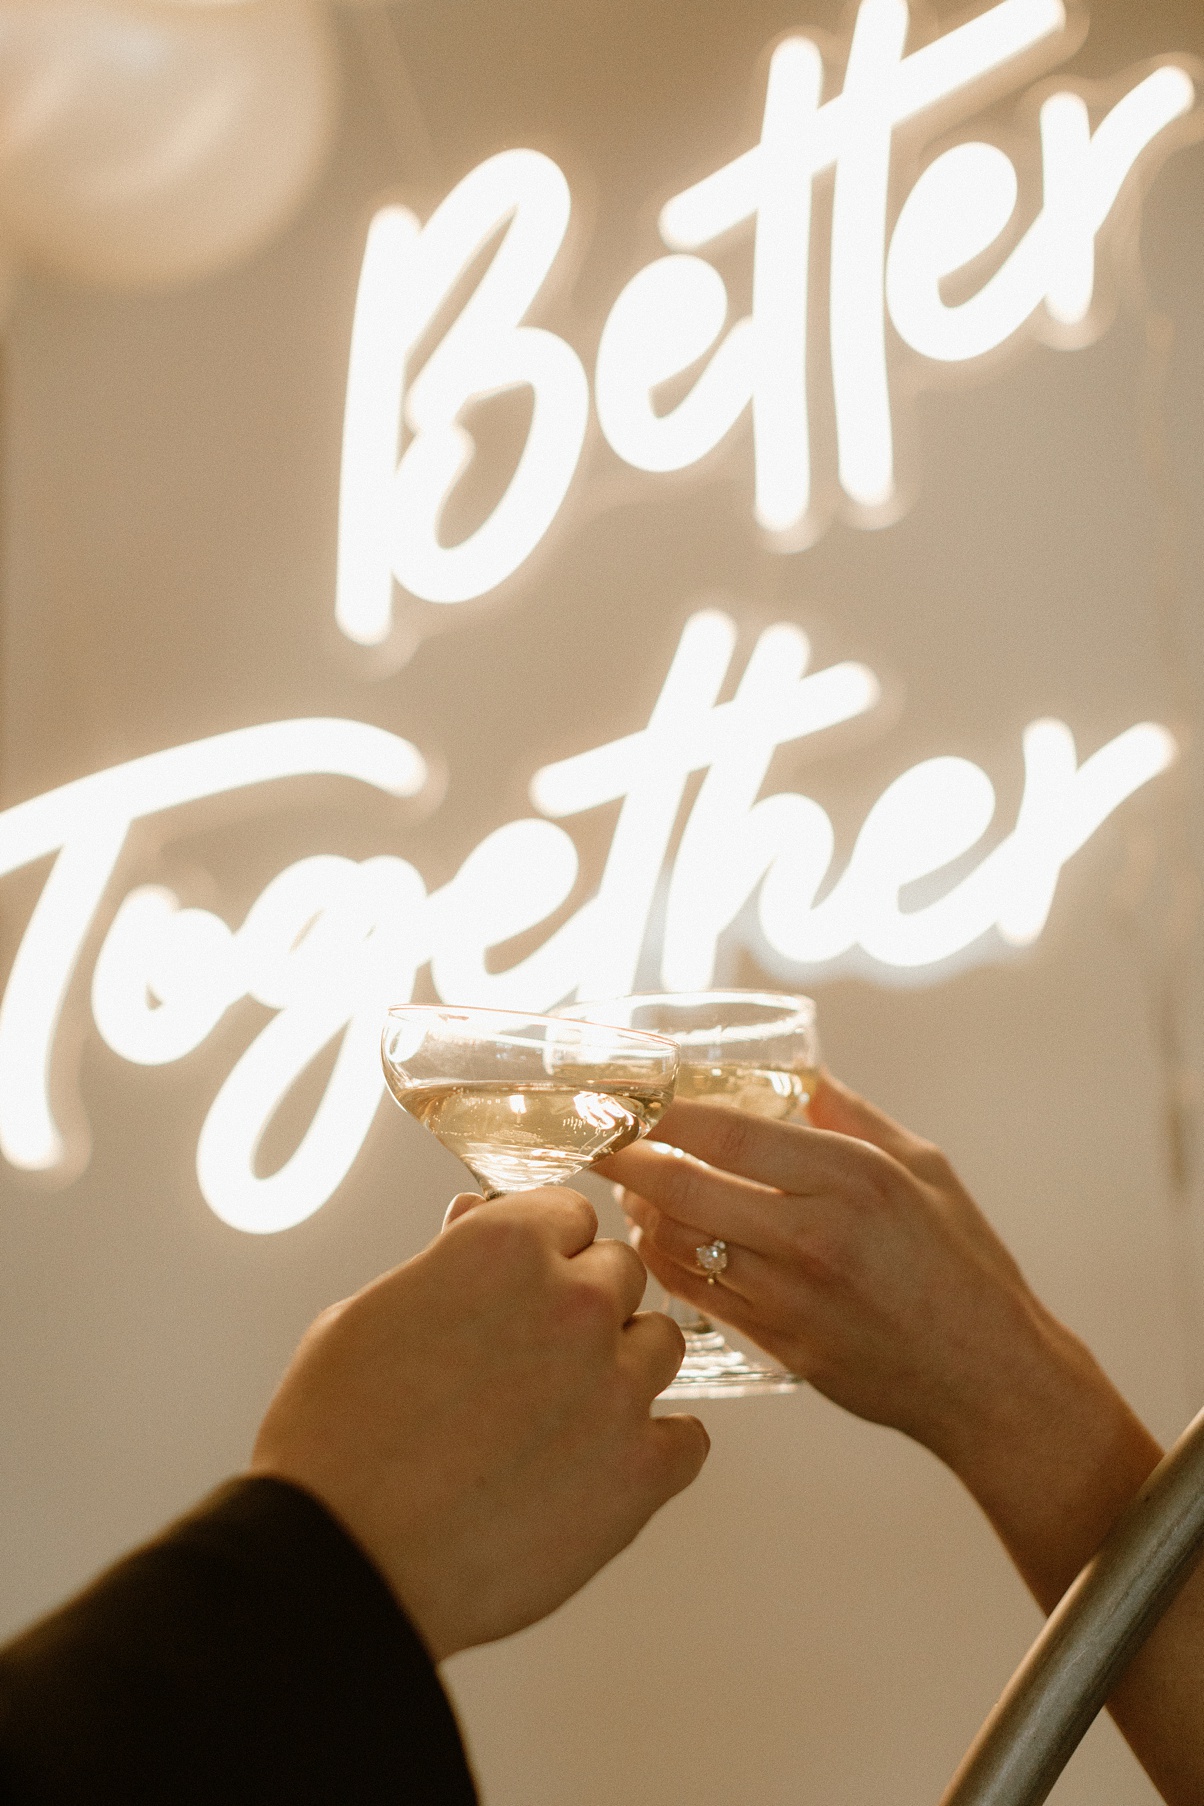 Block 41 wedding neon sign that says "better together" with a champagne toast